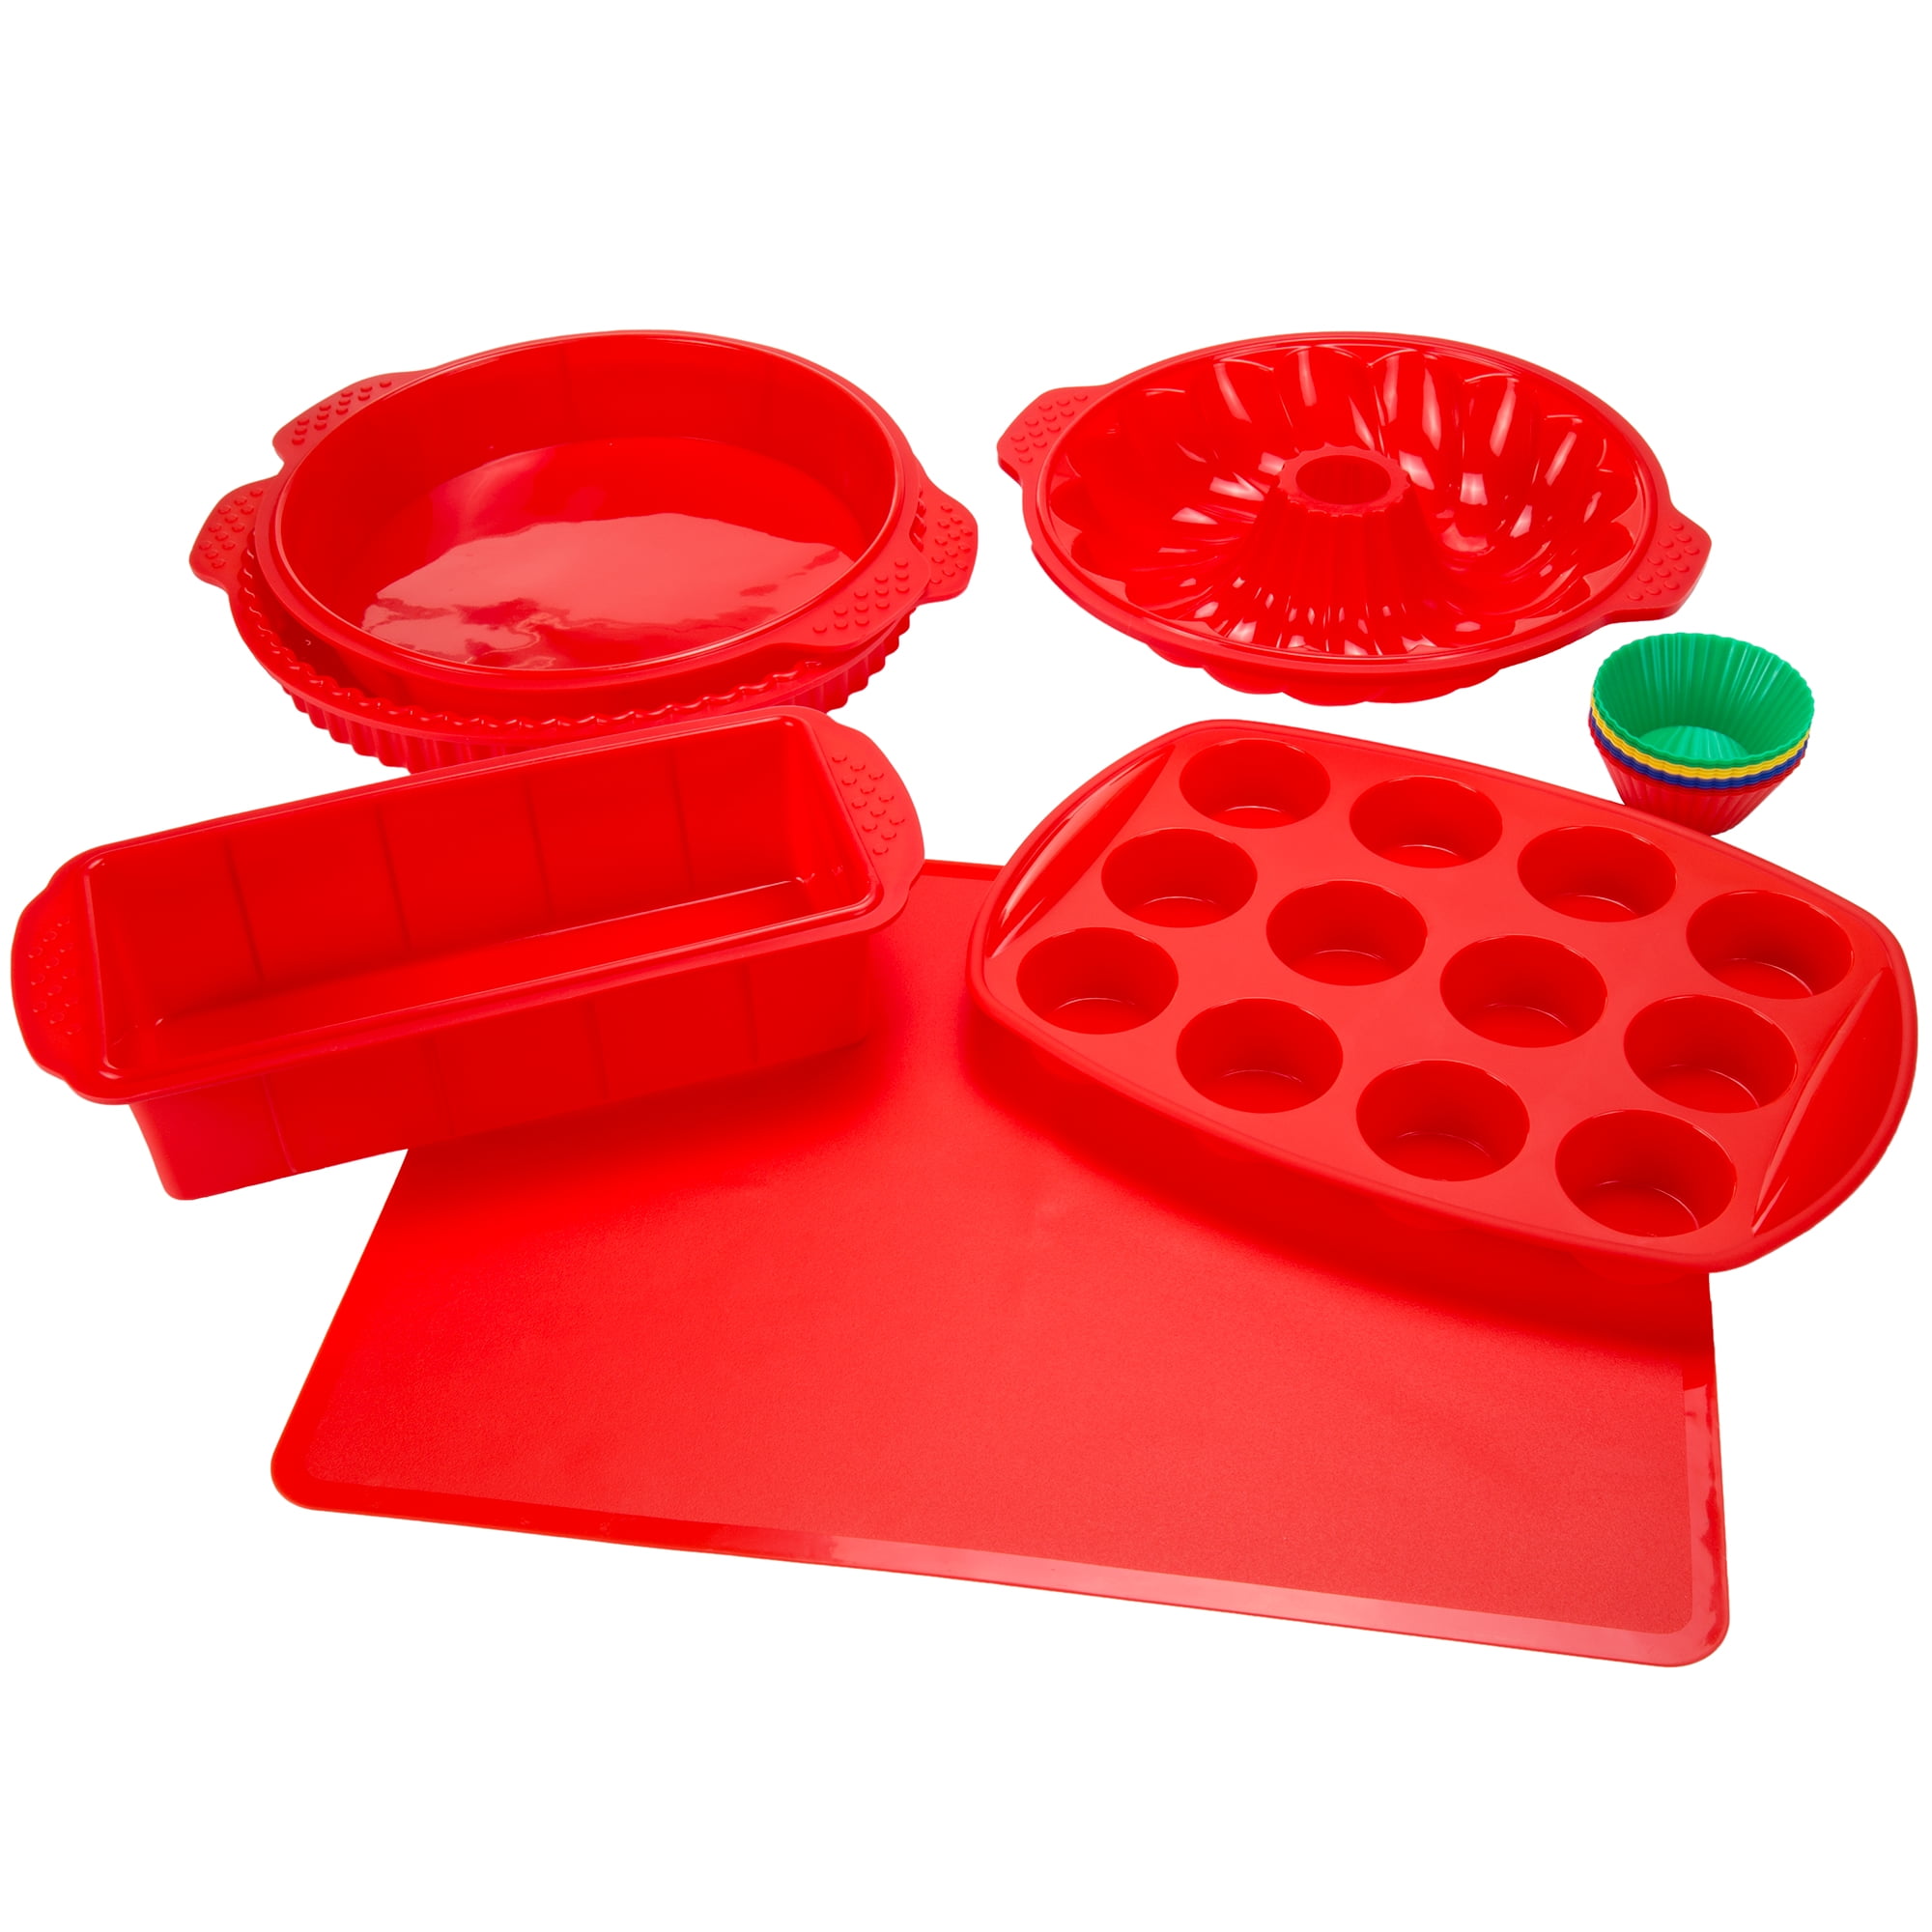 4 PCS Nonstick Bakeware With Grip For Cooking & Baking with Silicone Handles 